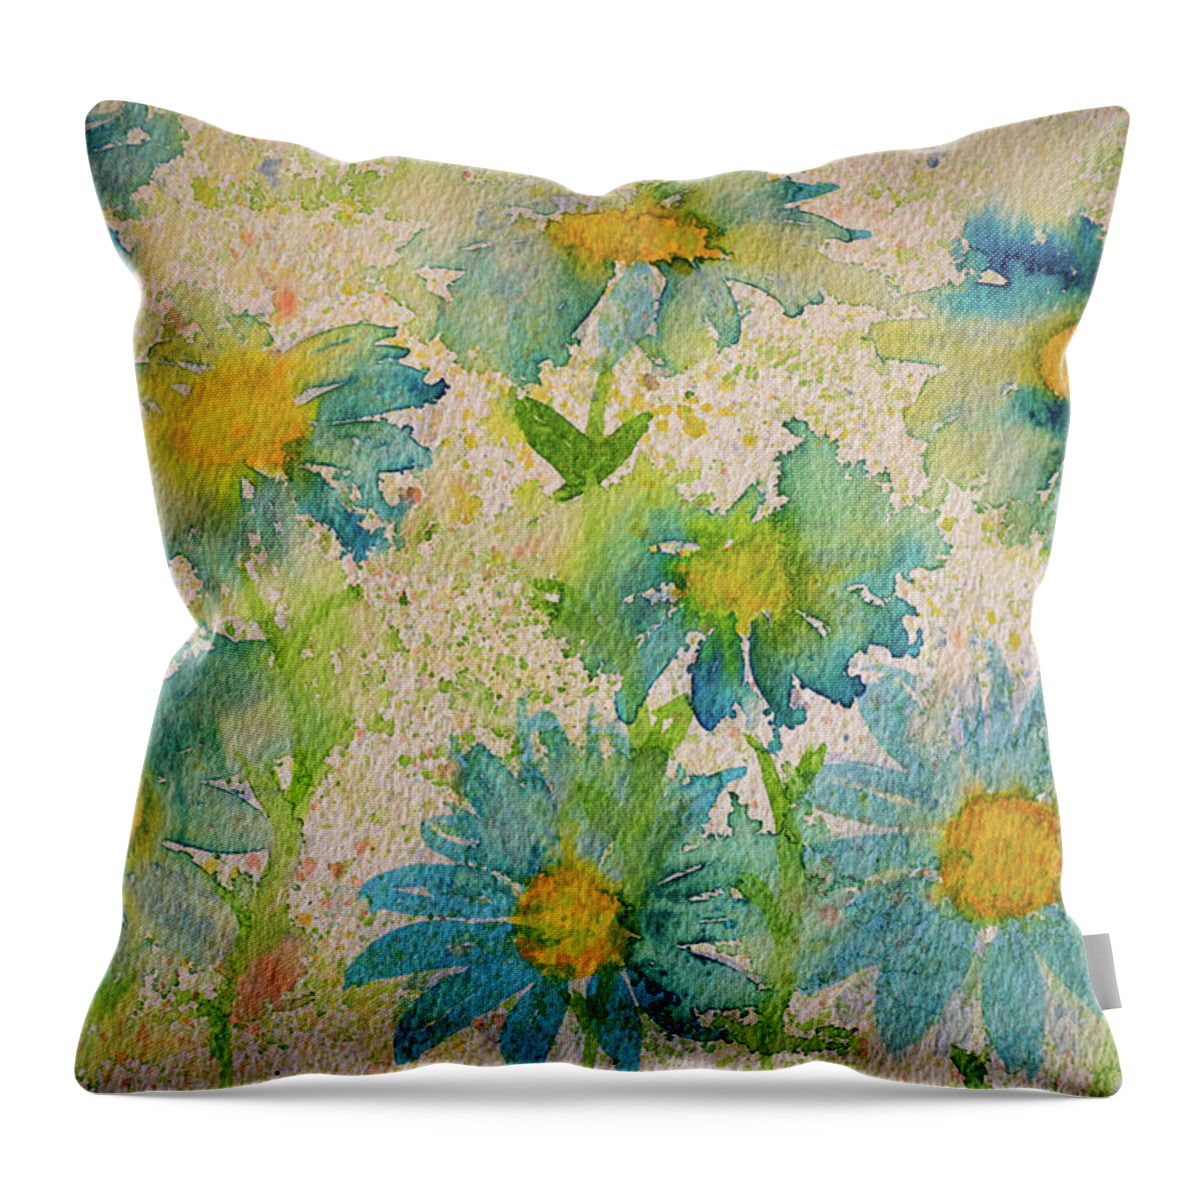 Daisy Throw Pillow featuring the painting Blue and Yellow Daisies by Nigel R Bell